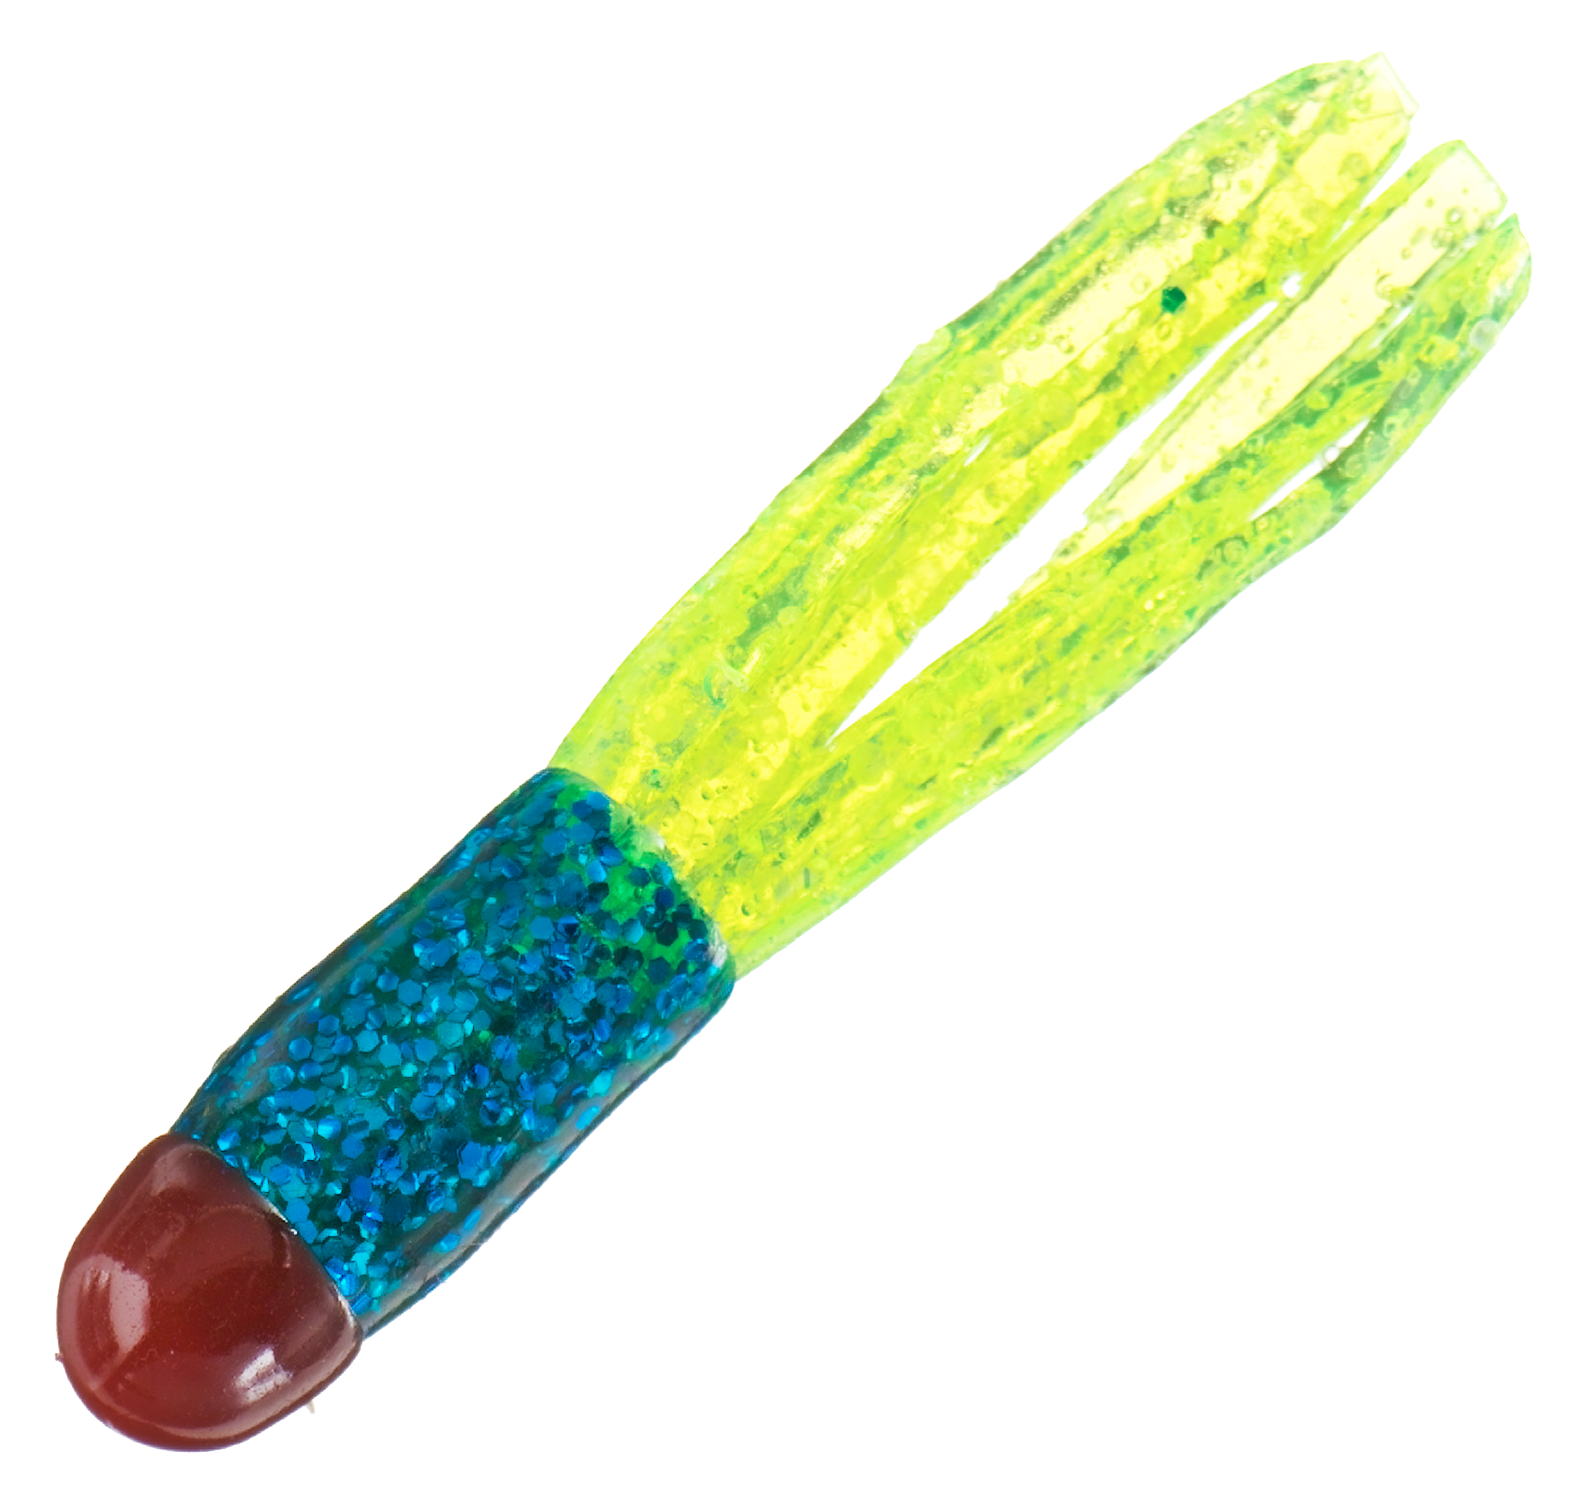 Bass Pro Shops Sparkle Squirts - 1-1/2"" - 15 pack - Red/Electric Blue/Chartreuse